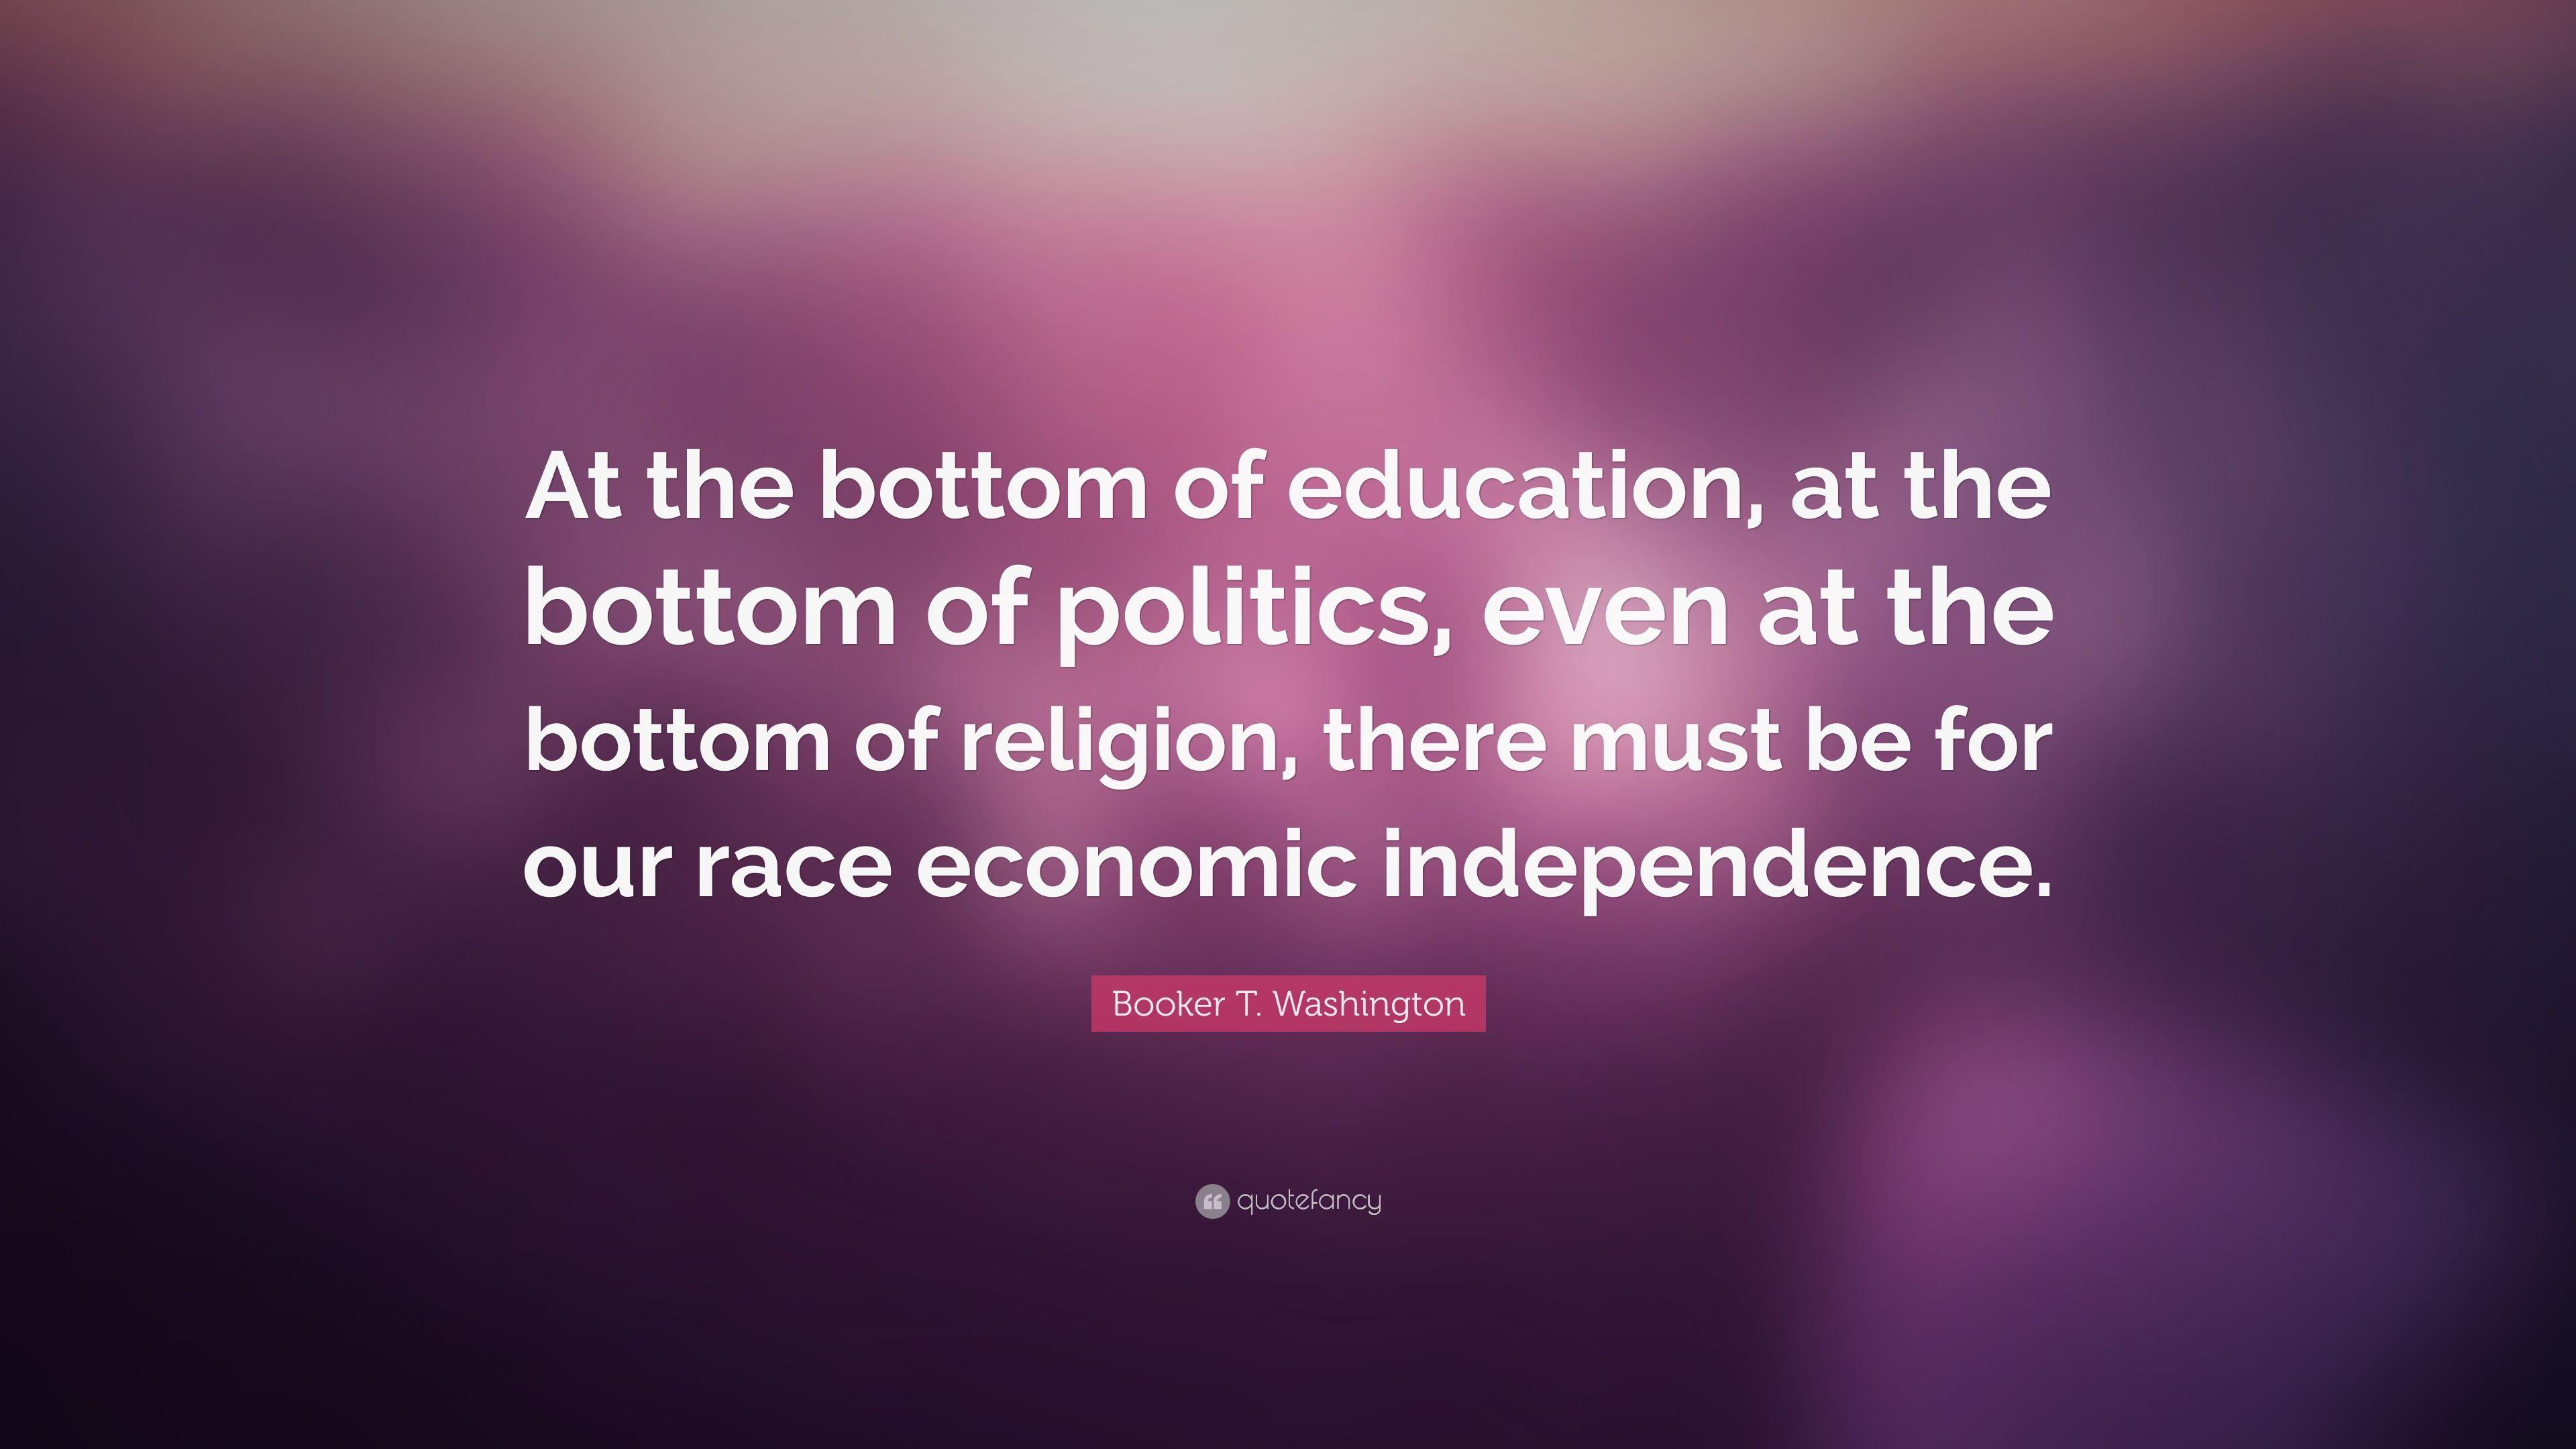 Booker T. Washington Quote: “At the bottom of education